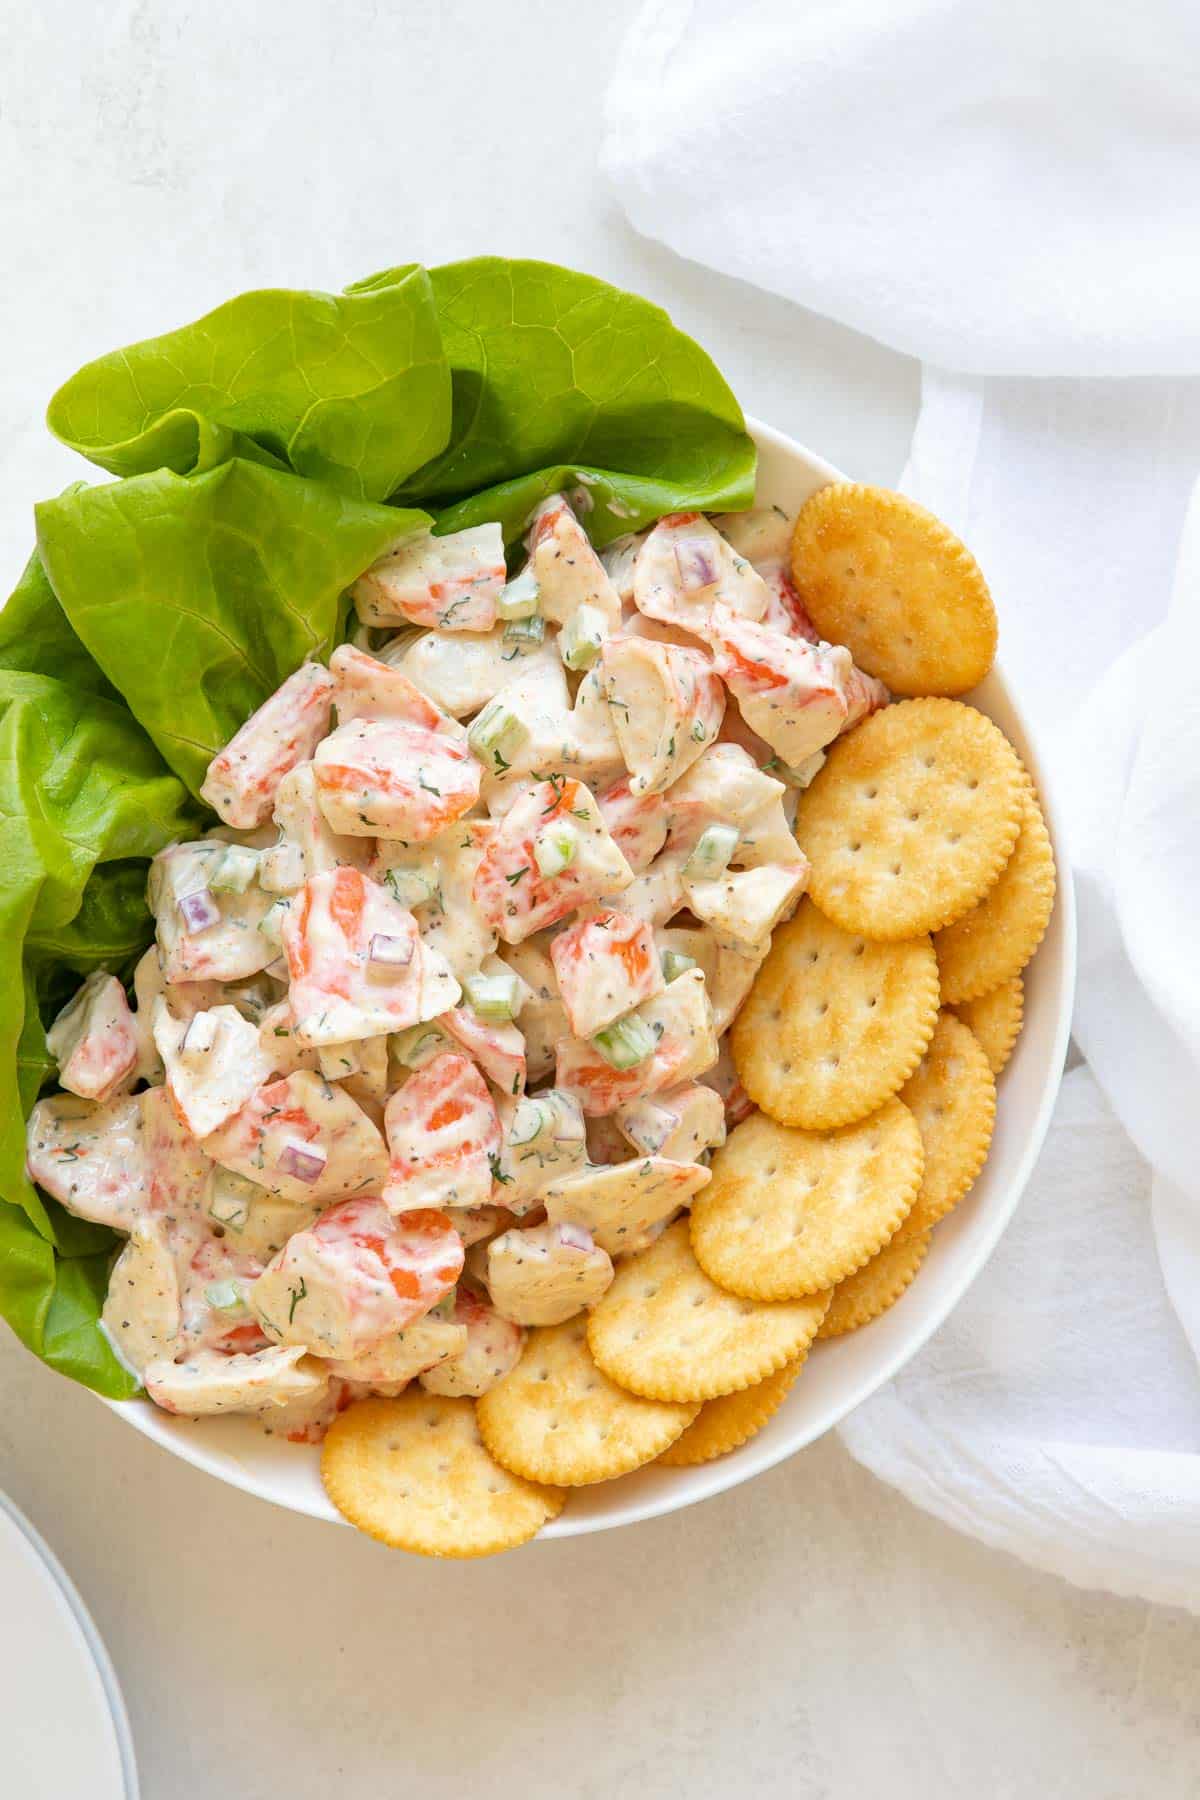 Imitation crab salad in a bowl with lettuce and crackers by a white kitchen towel.